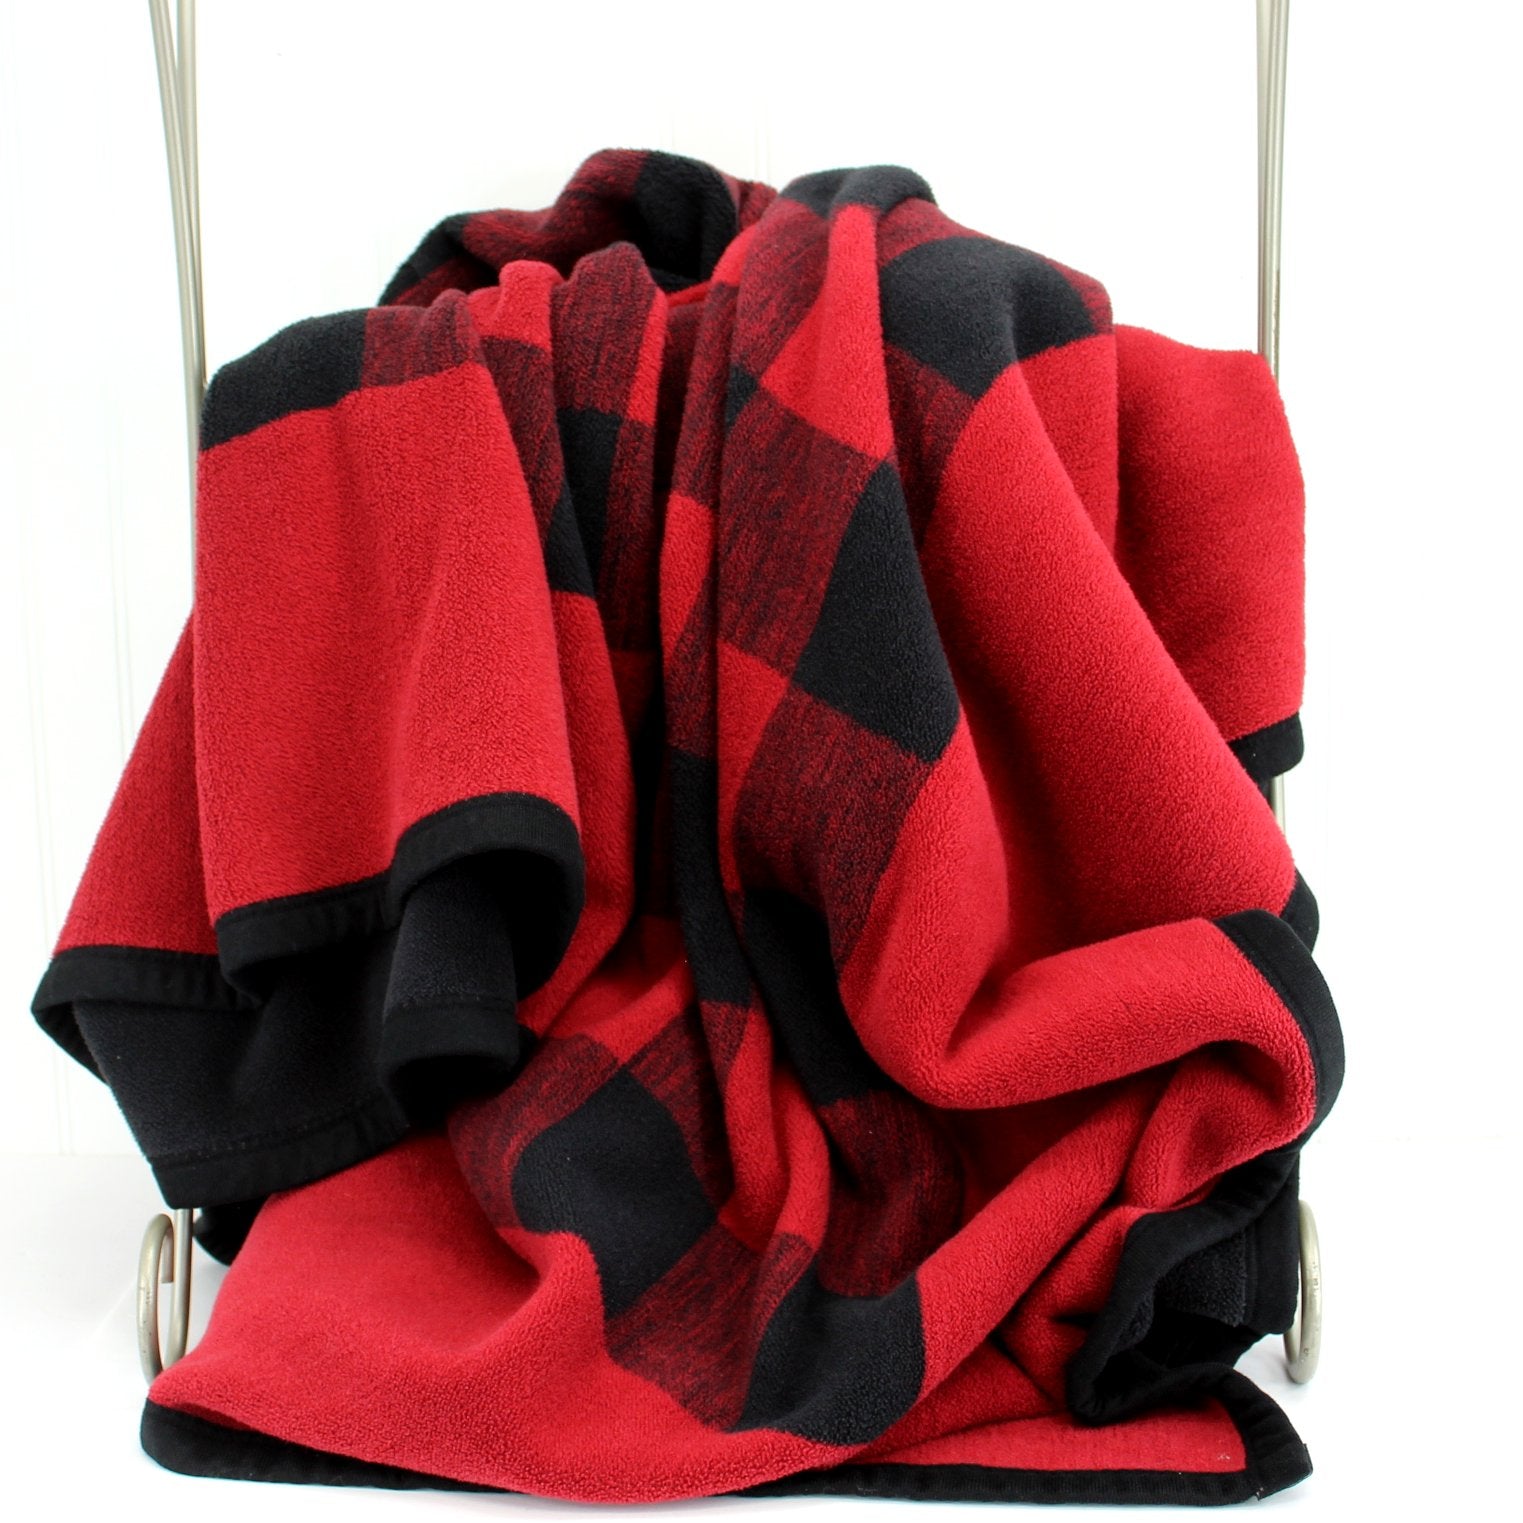 Woolrich Home Polyester Blanket Black Red Washable Large 80" X 74"